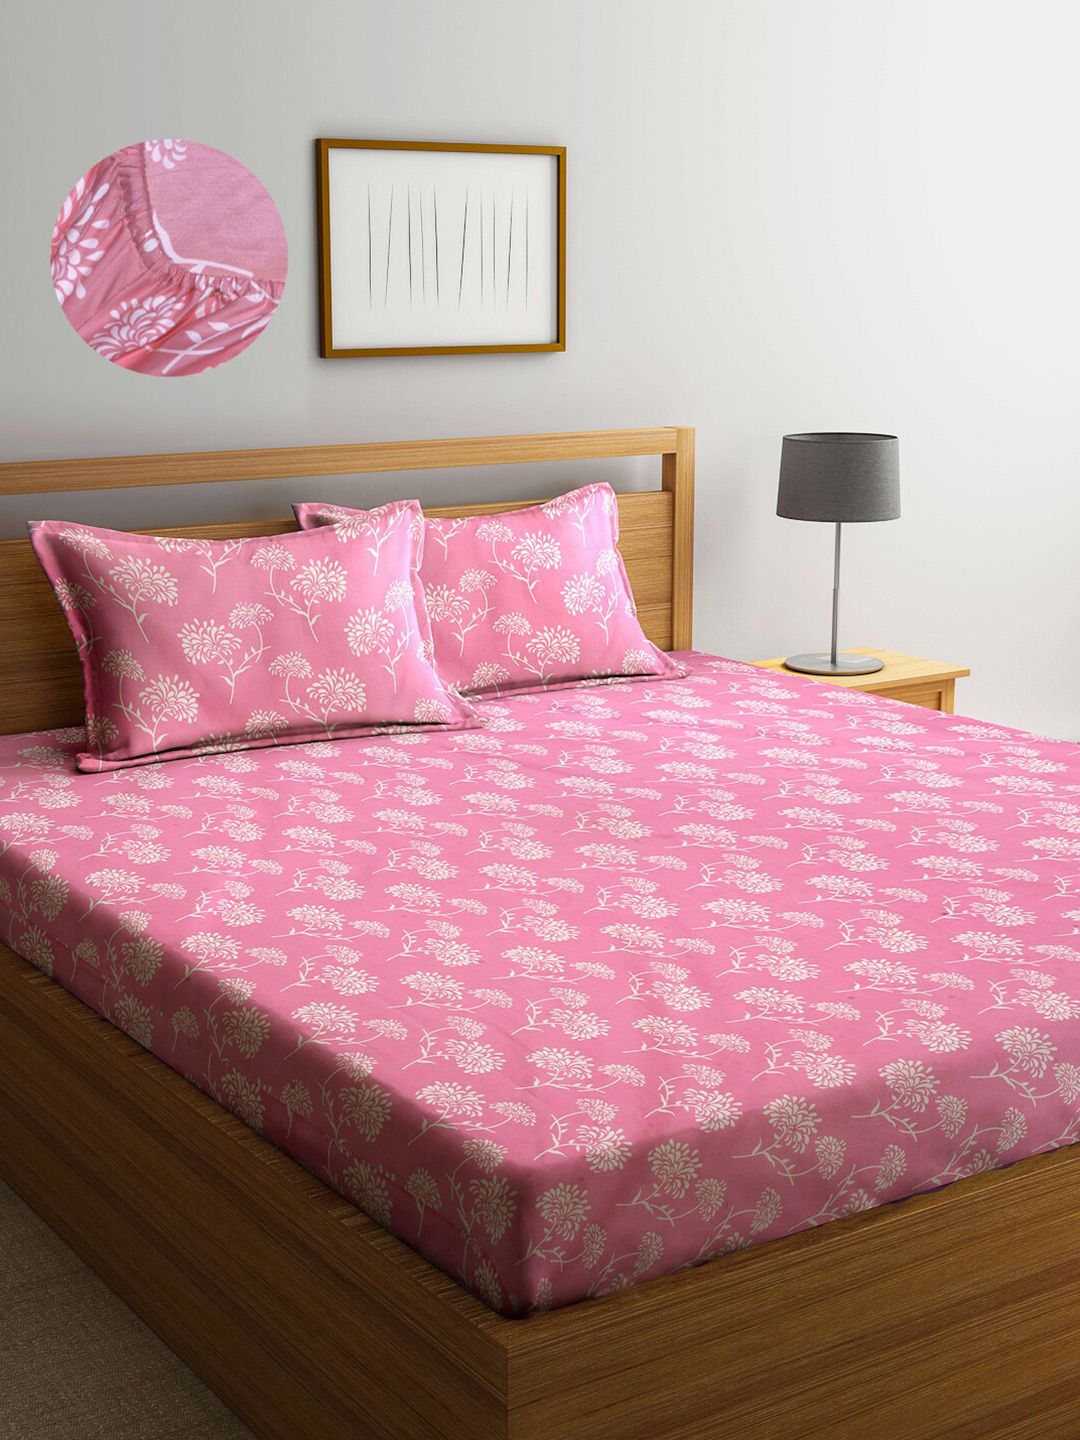 Arrabi Pink & Cream-Coloured Floral 300 TC King Bedsheet with 2 Pillow Covers Price in India